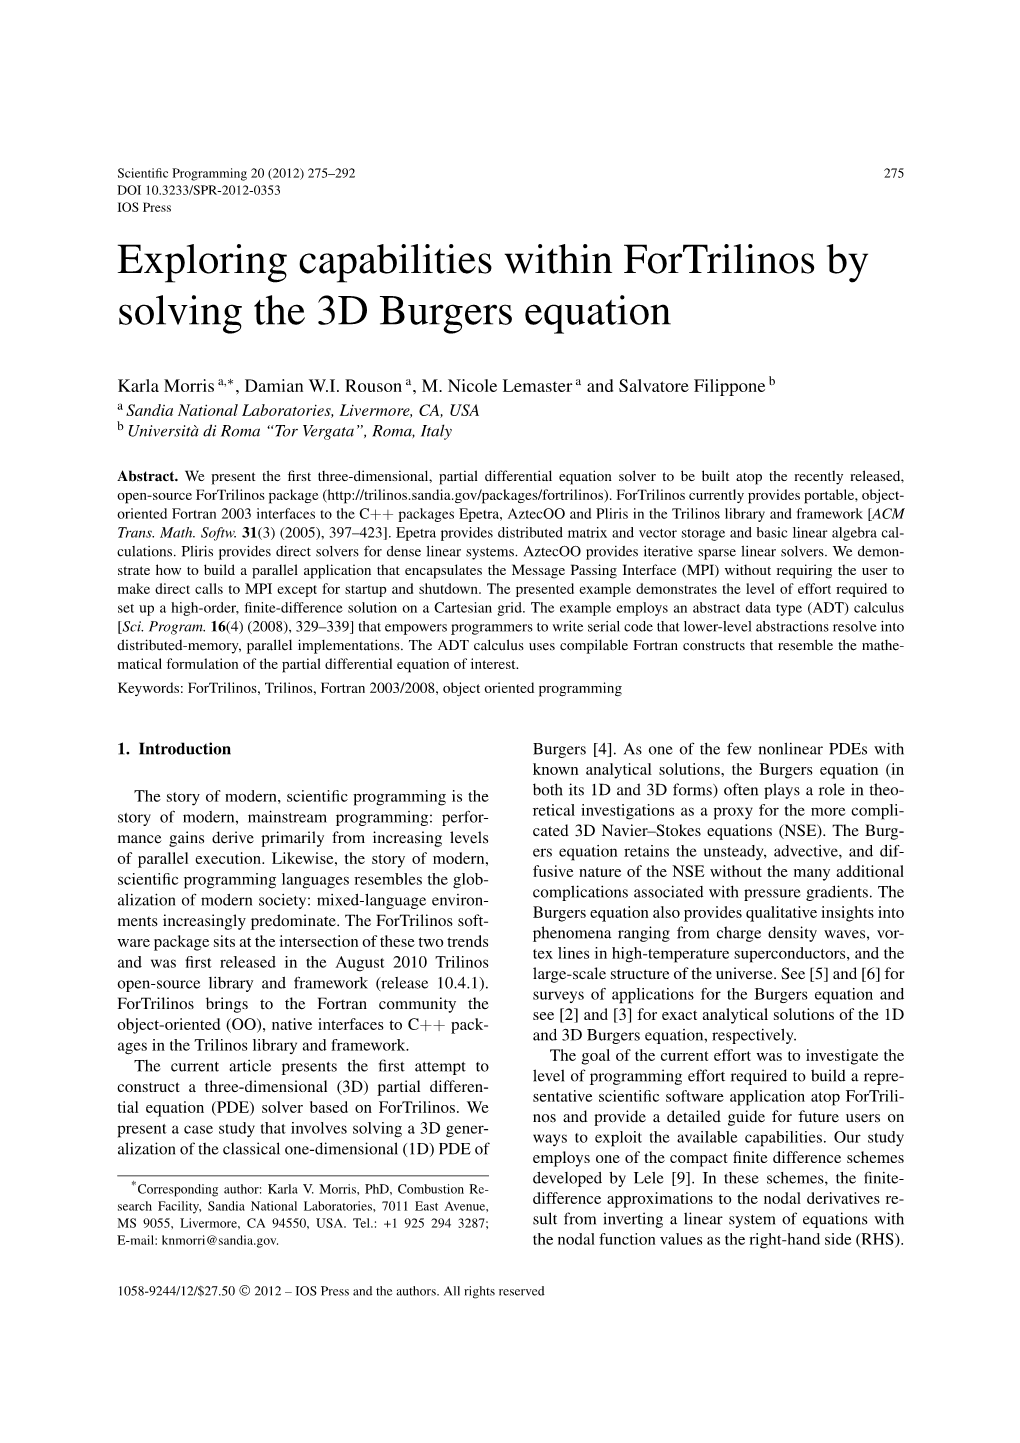 Exploring Capabilities Within Fortrilinos by Solving the 3D Burgers Equation